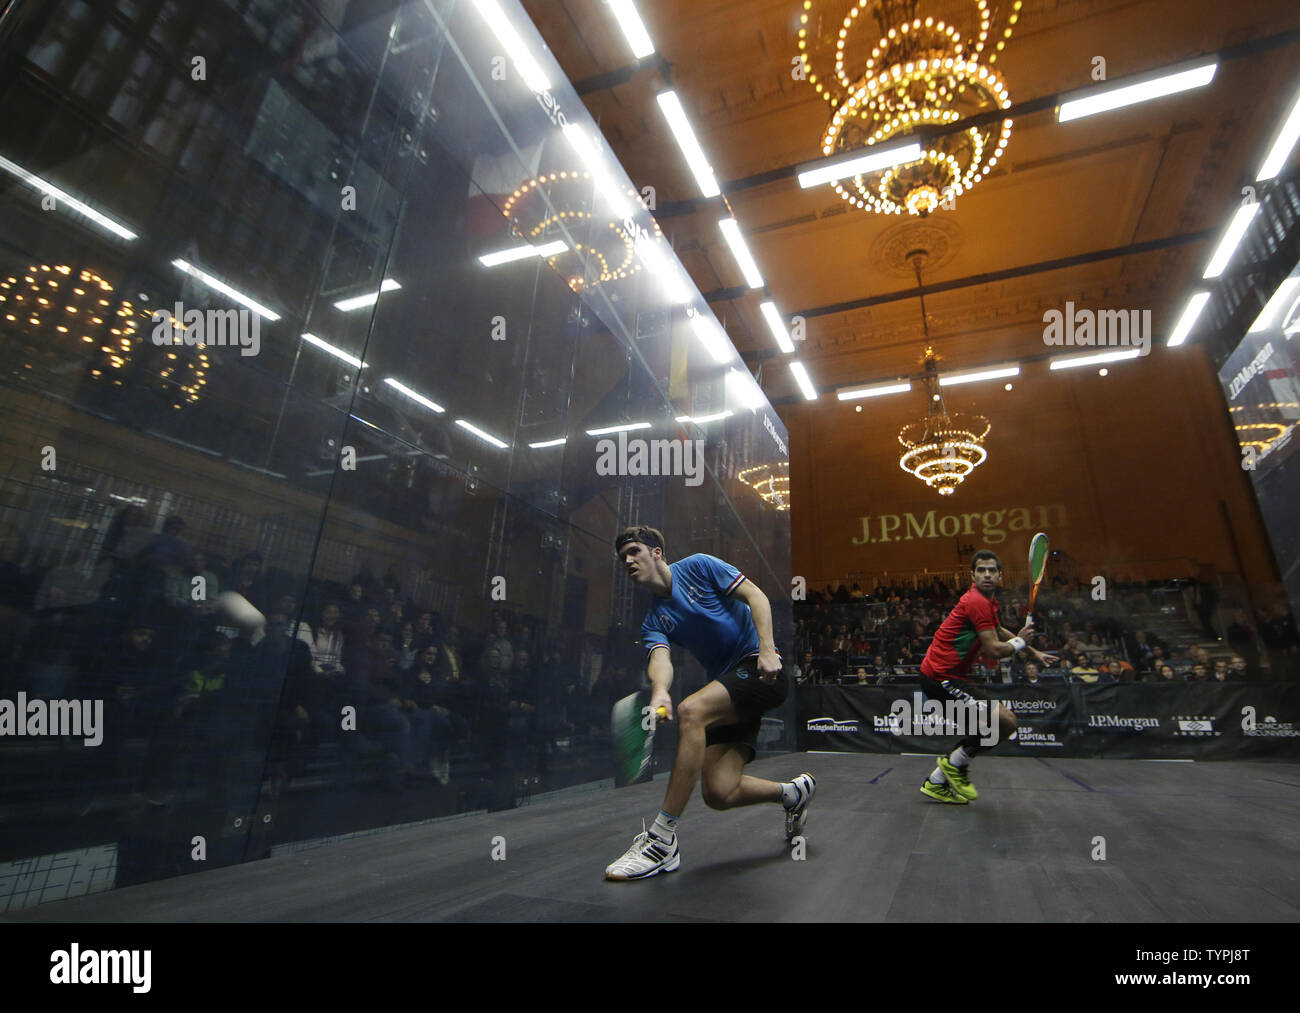 Chris Simpson of England hits a forehand in his match against Cesar Salazar of Mexico at JPMorgan Chase & Co.'s 18th annual  "Tournament of Champions" Professional Squash Tournament in Grand Central Terminal in New York City on January 16, 2015. The annual tournament is scheduled to continue through January 23rd.       Photo by John Angelillo/UPI Stock Photo